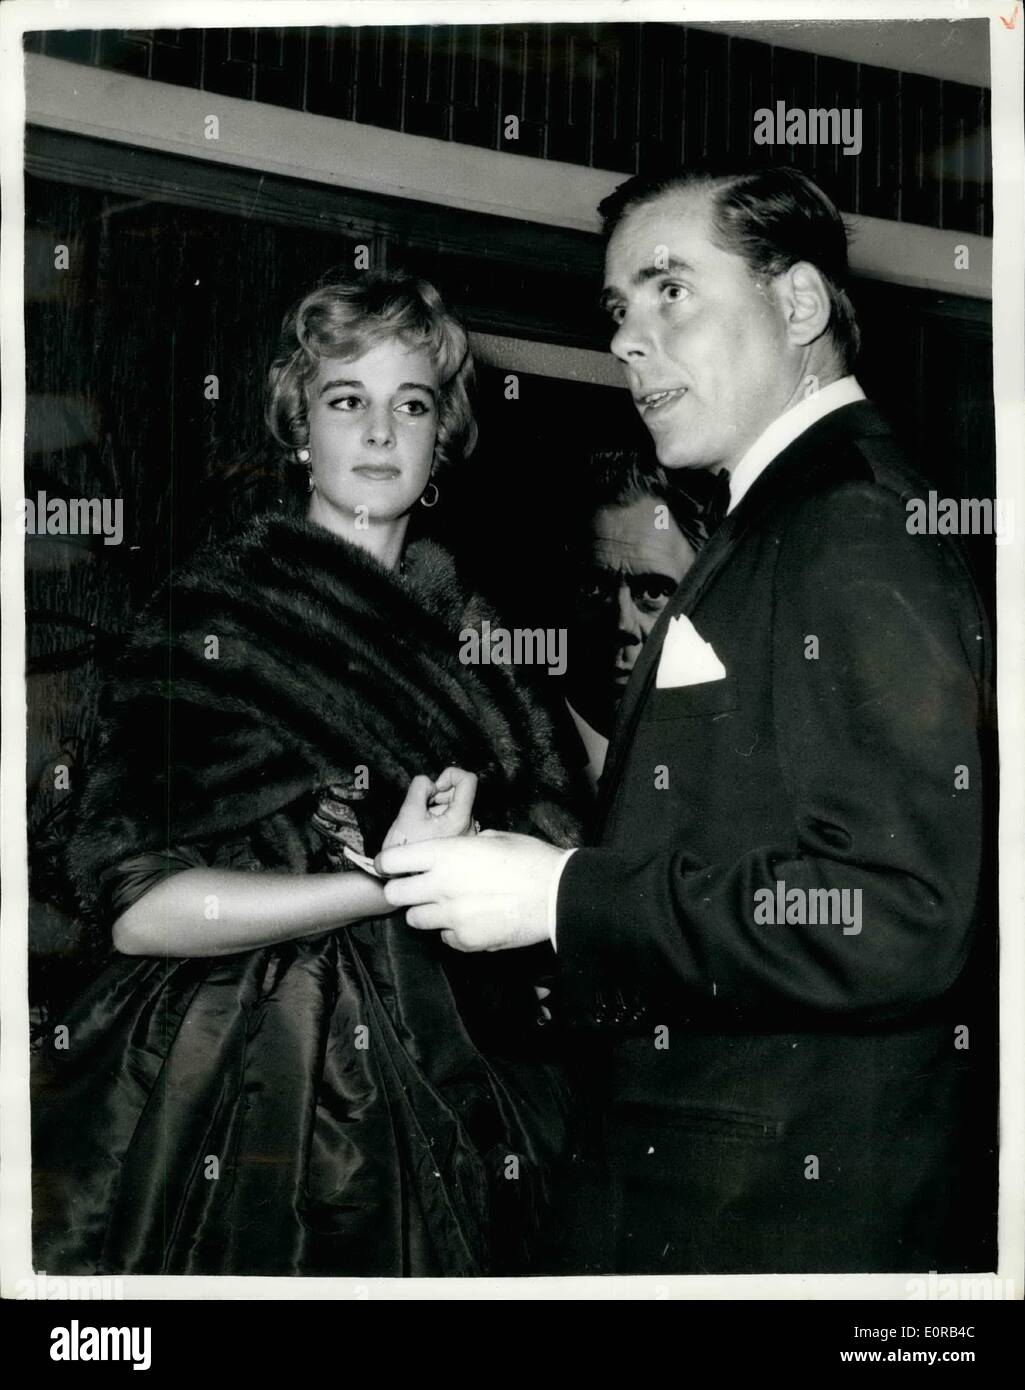 Oct. 10, 1958 - Premiere Of The Film ''I Was Monty's Double''. Bobo Sigrist And American Film Producer. Photo shows Bobo Sigrist the aircraft fortune heiress - who is separated from her husband Gregg Juarez - seen with American film producer Kevin McClory - when they attended the London Premiere of the film ''I Was Monty's Double' Stock Photo